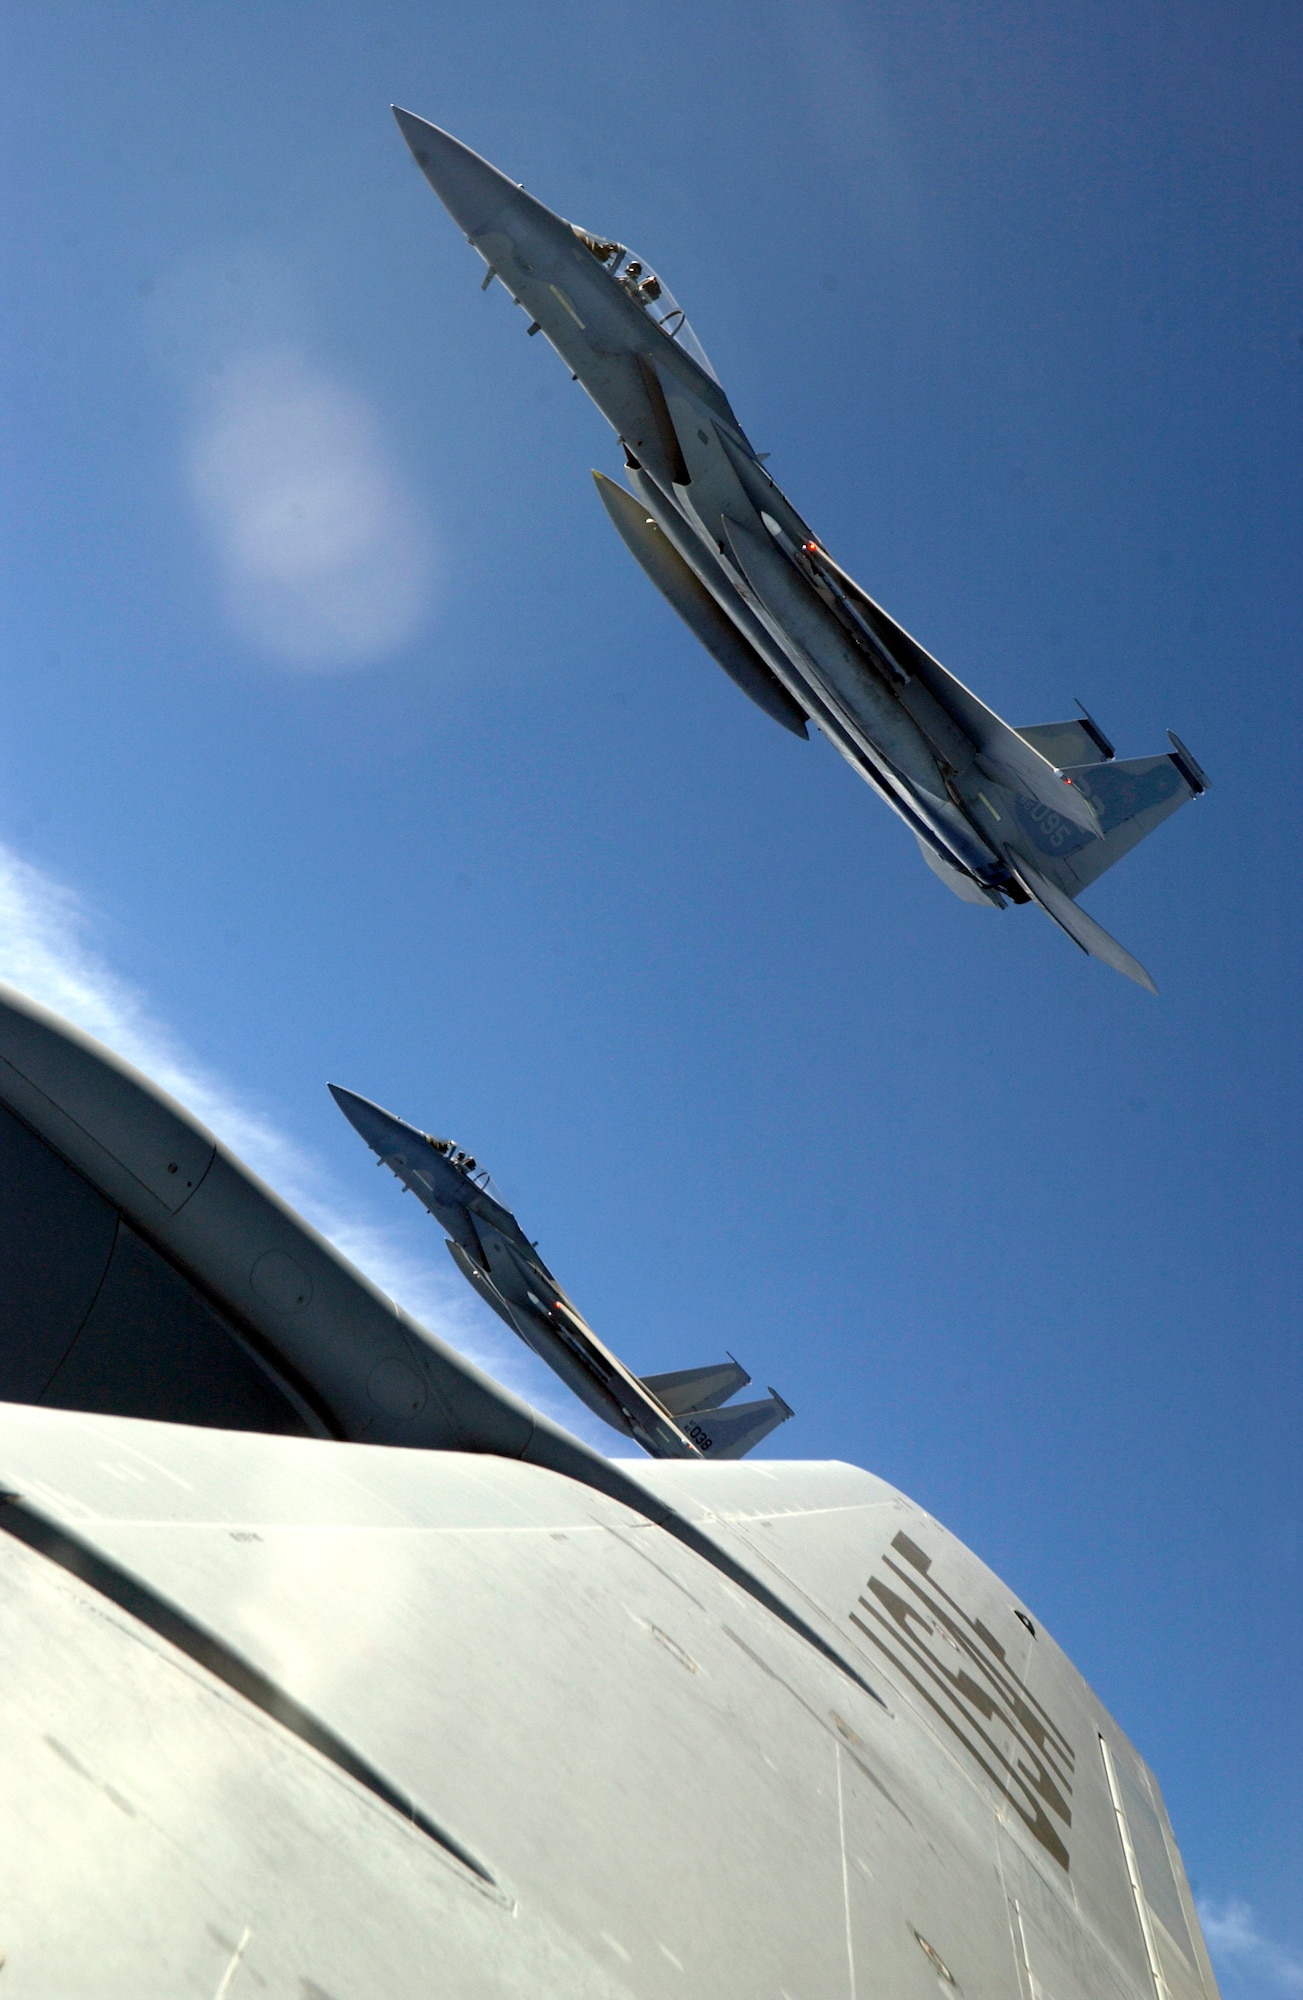 ANDERSEN AFB, GUAM - An F-15 deployed here from the 44th Fighter Squadron, Kadena Air Base, Japan,  flies along side a KC-135 Stratotanker, from the New Hampshire Air Nation Guard, during Valiant Shield, Aug. 9, 2007.  During the exercise, U.S. Air Force aircraft and personnel from stateside bases and Kadena Air Base, Japan, work together as part of an expeditionary air wing based at Andersen AFB, Guam. Andersen AFB will also be the beddown location for approximately 64 U.S. Air Force and 29 U.S. Navy aircraft, plus transient aircraft, during Valiant Shield. Valiant Shield 07, the largest joint exercise in recent history, includes 30 ships, more than 280 aircraft and more than 20,000 service members from the Navy, Marine Corps, Air Force and Coast Guard. (U.S. Air Force photo by Senior Airman Miranda Moorer) 